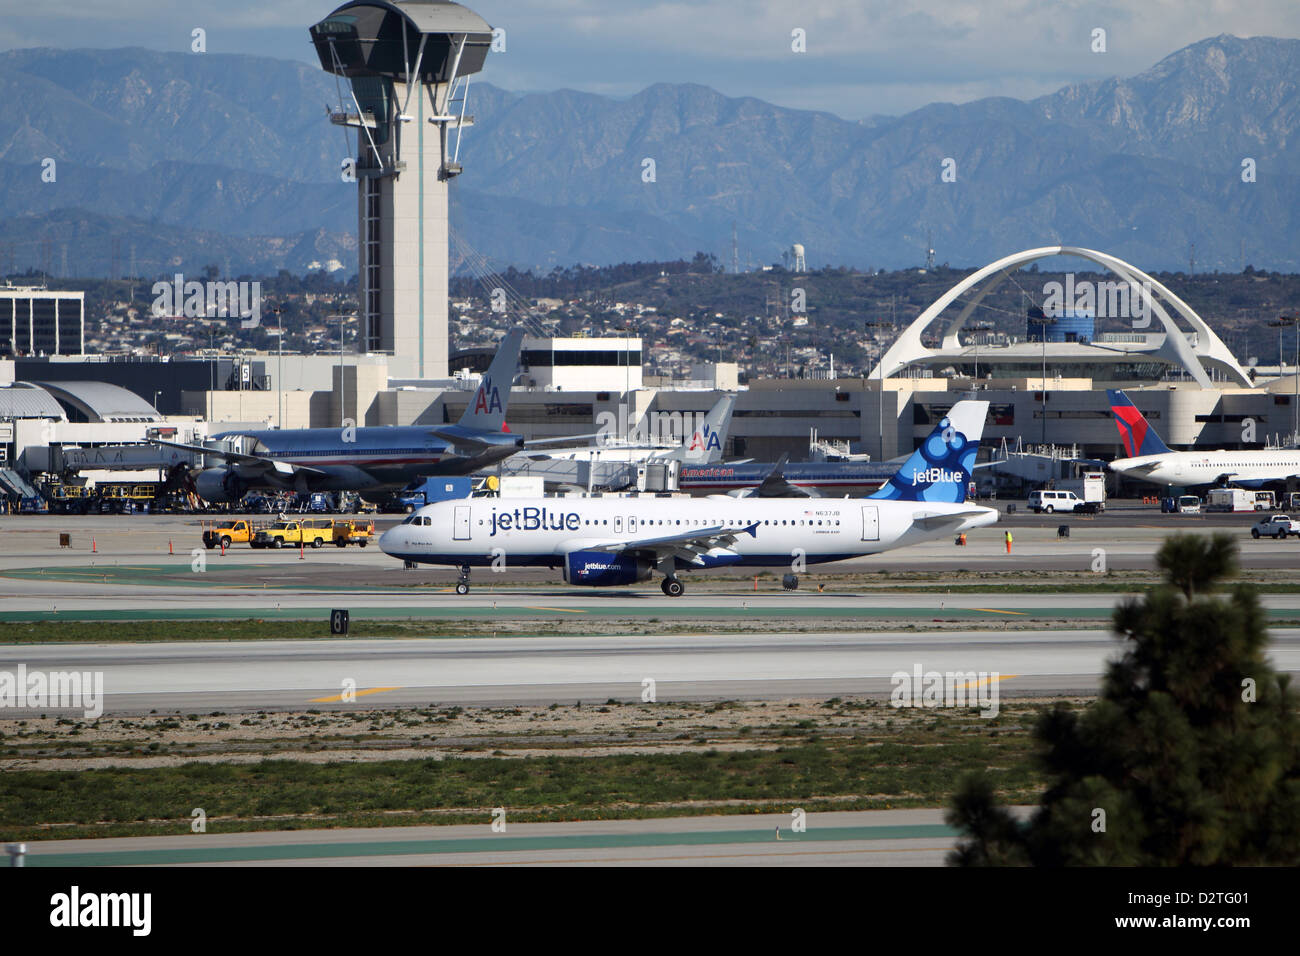 Jetblue Airbus A320-214 taxis at Los Angeles Airport on January 28, 2013 Stock Photo